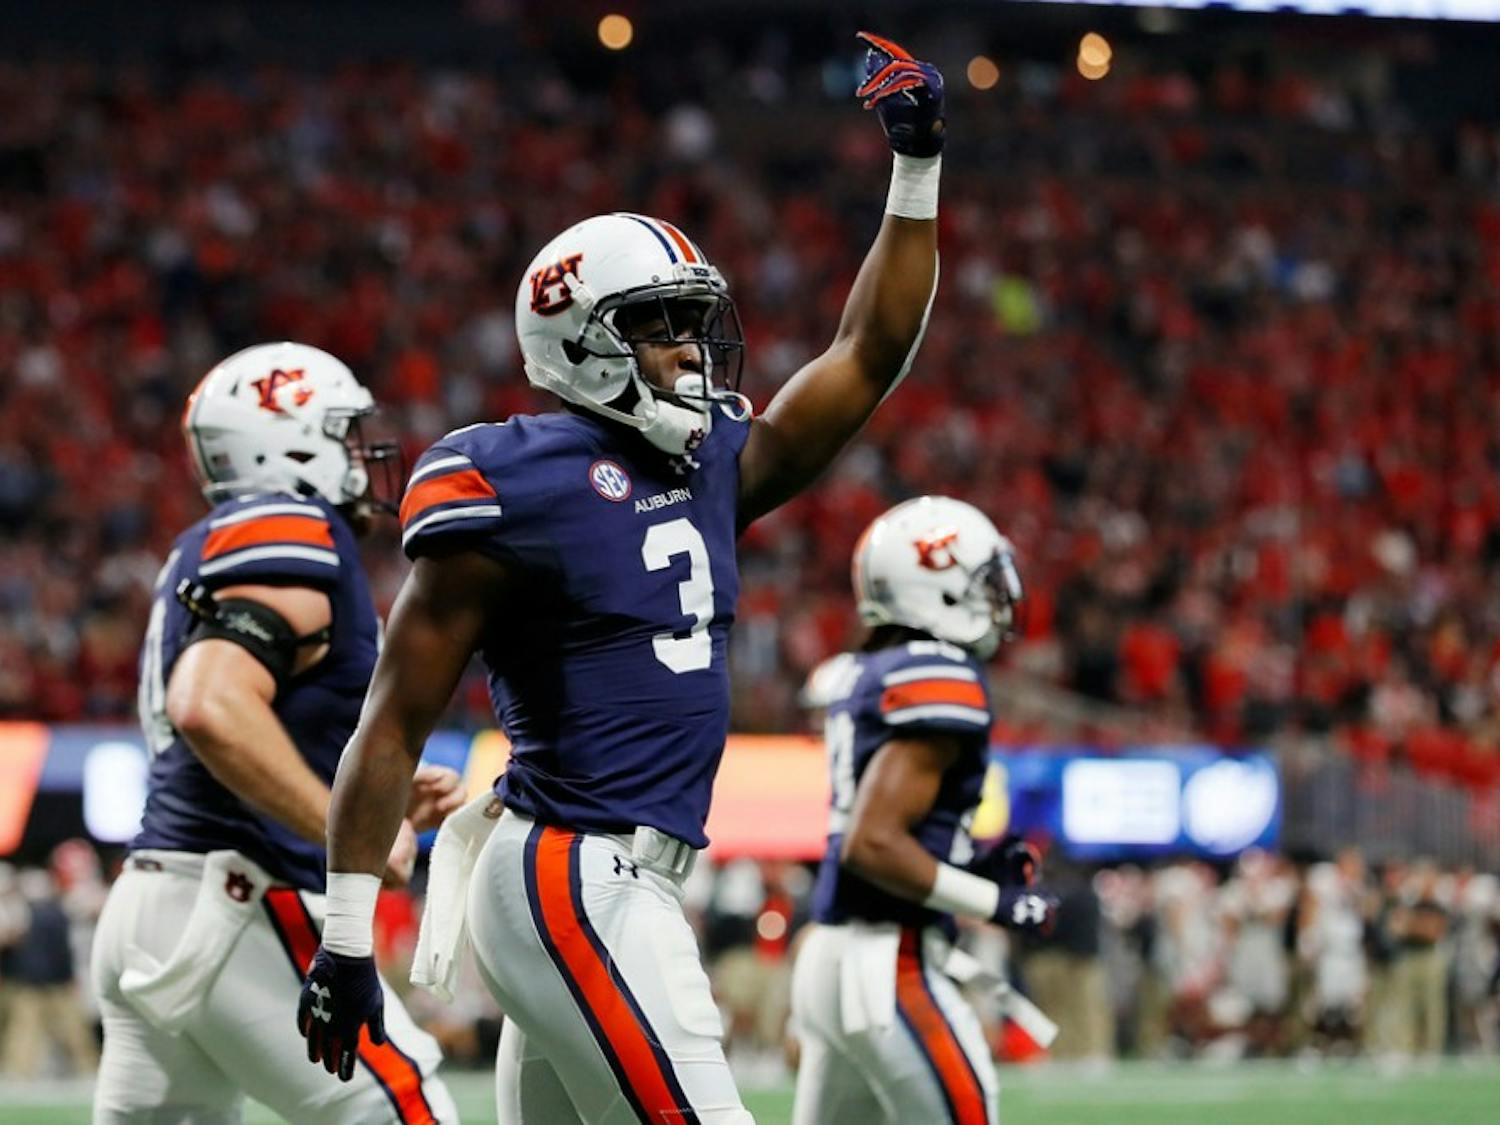 Nate Craig-Myers #3 of the Auburn Tigers celebrates a touchdown during the first half against the Georgia Bulldogs in the SEC Championship at Mercedes-Benz Stadium on December 2, 2017 in Atlanta, Georgia.